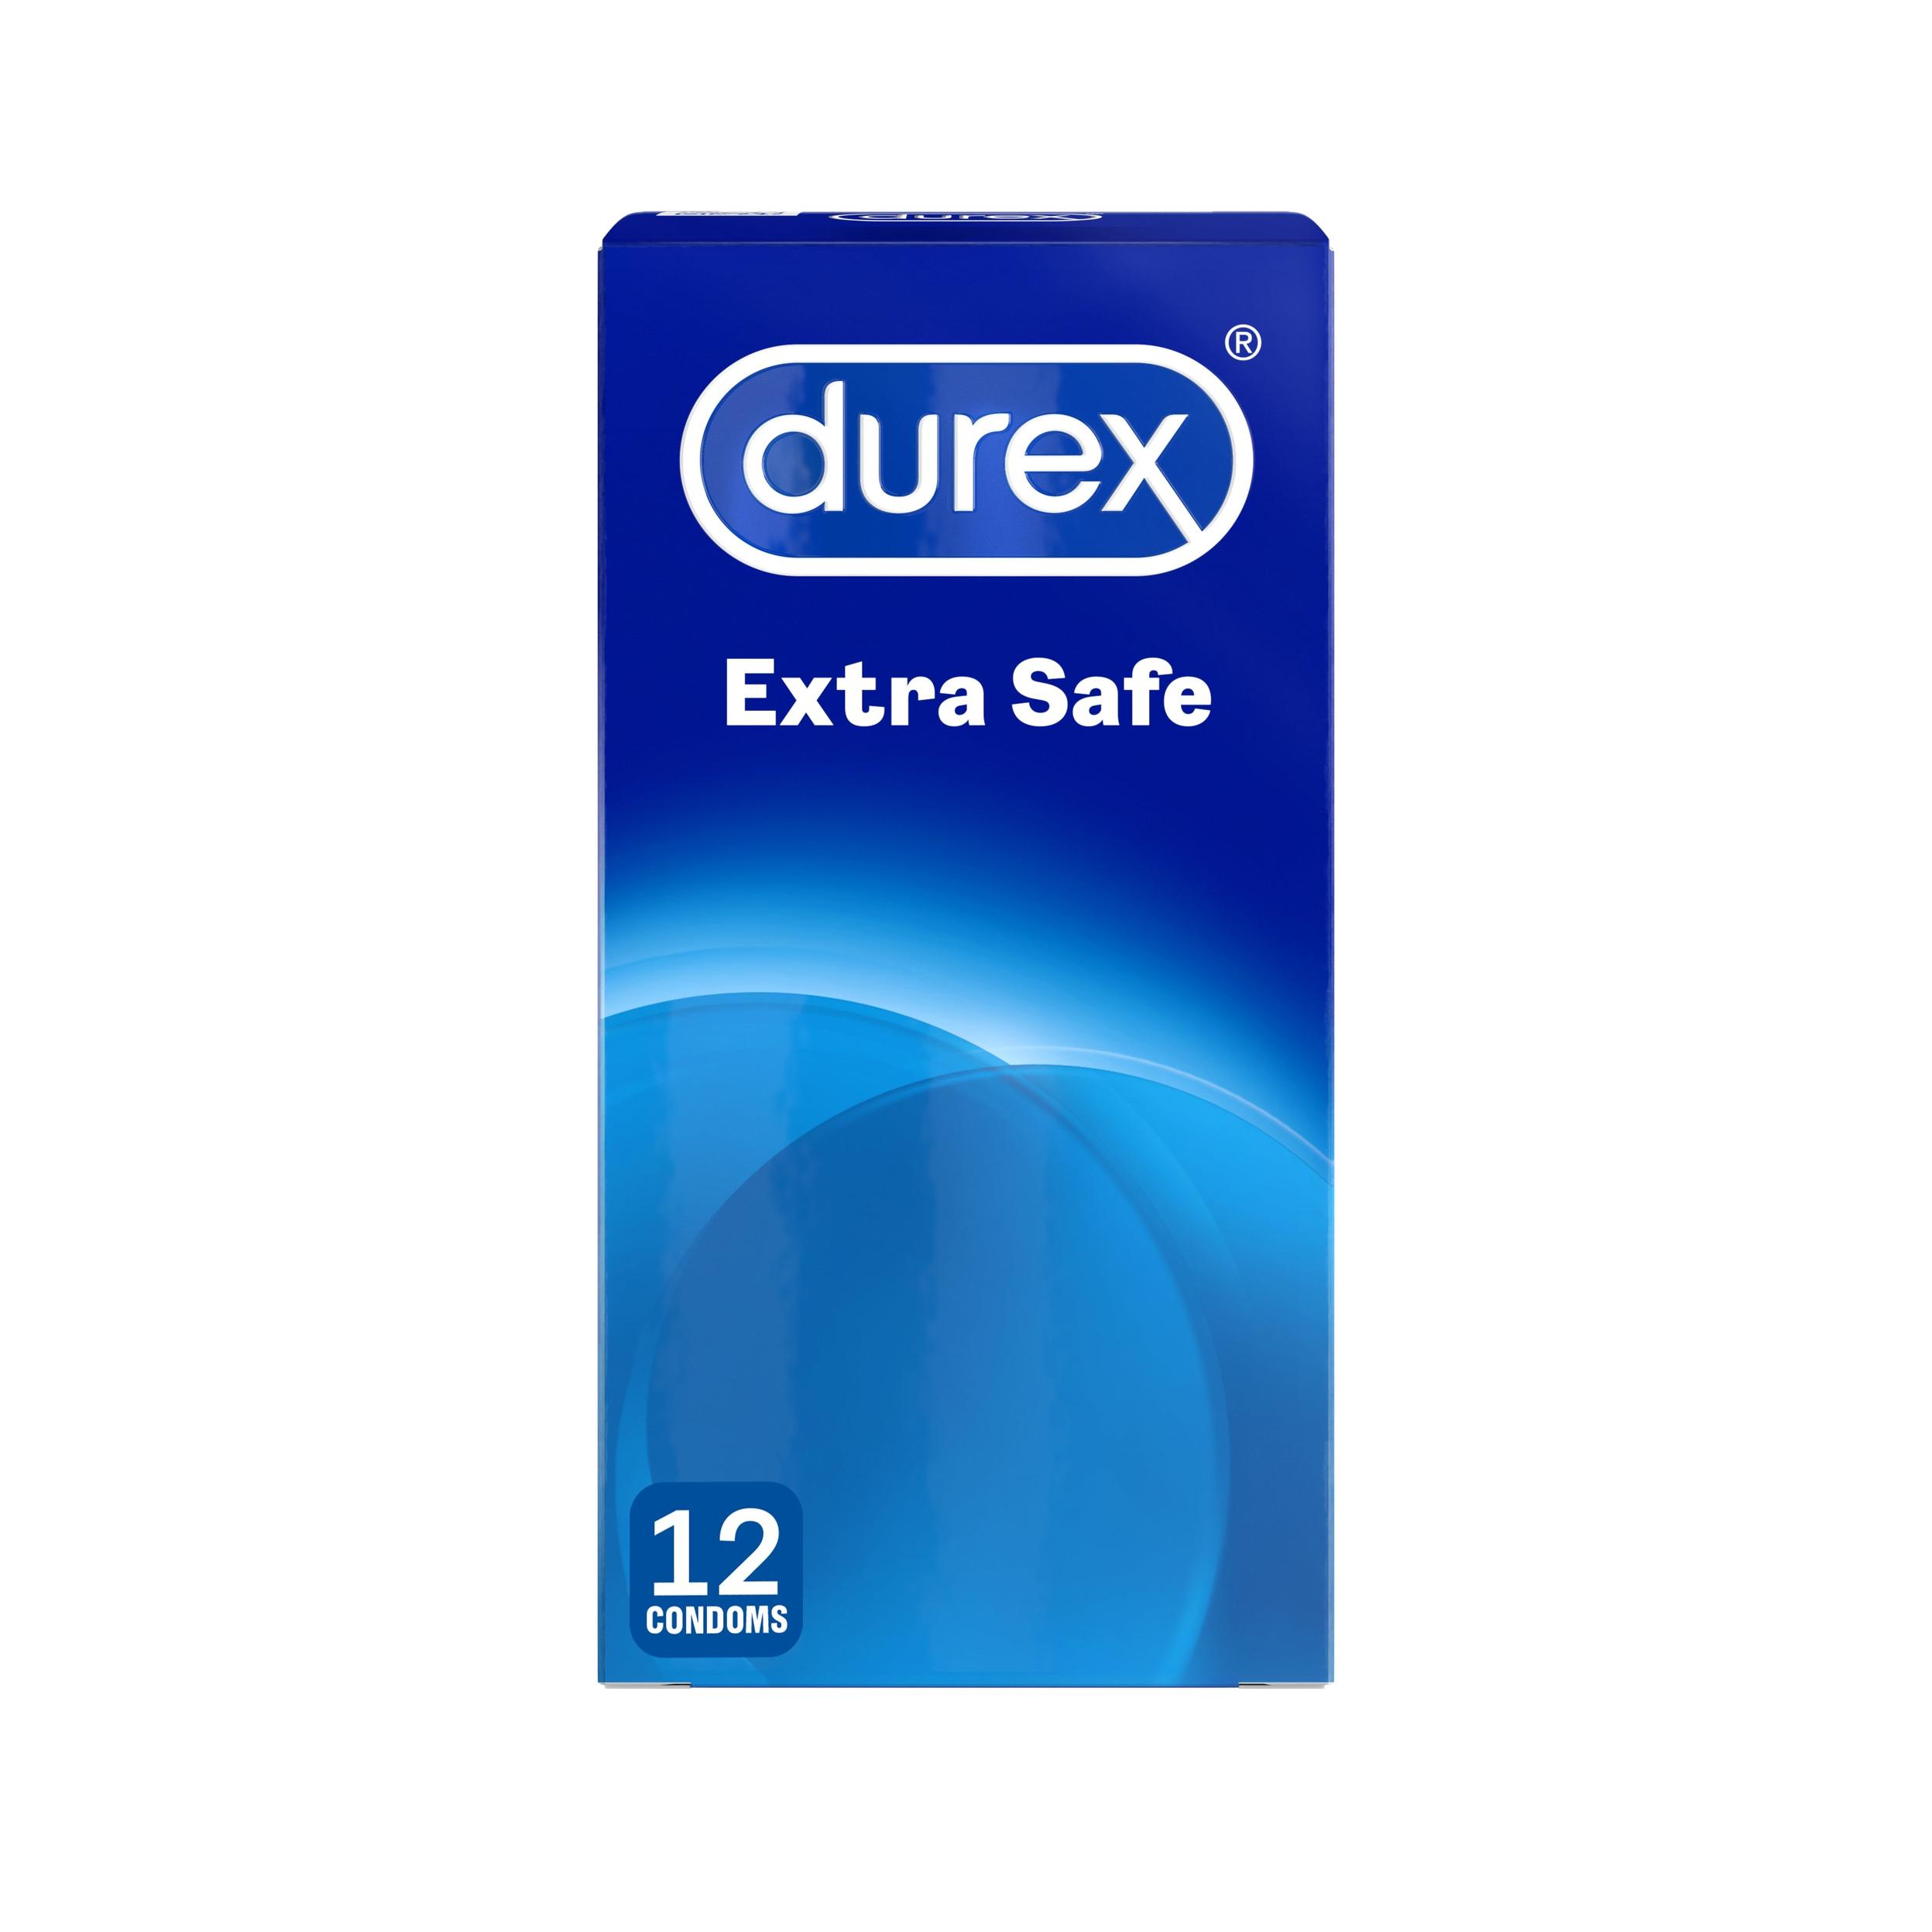 Durex extra safe condoms offers at £649 in Lloyds Pharmacy